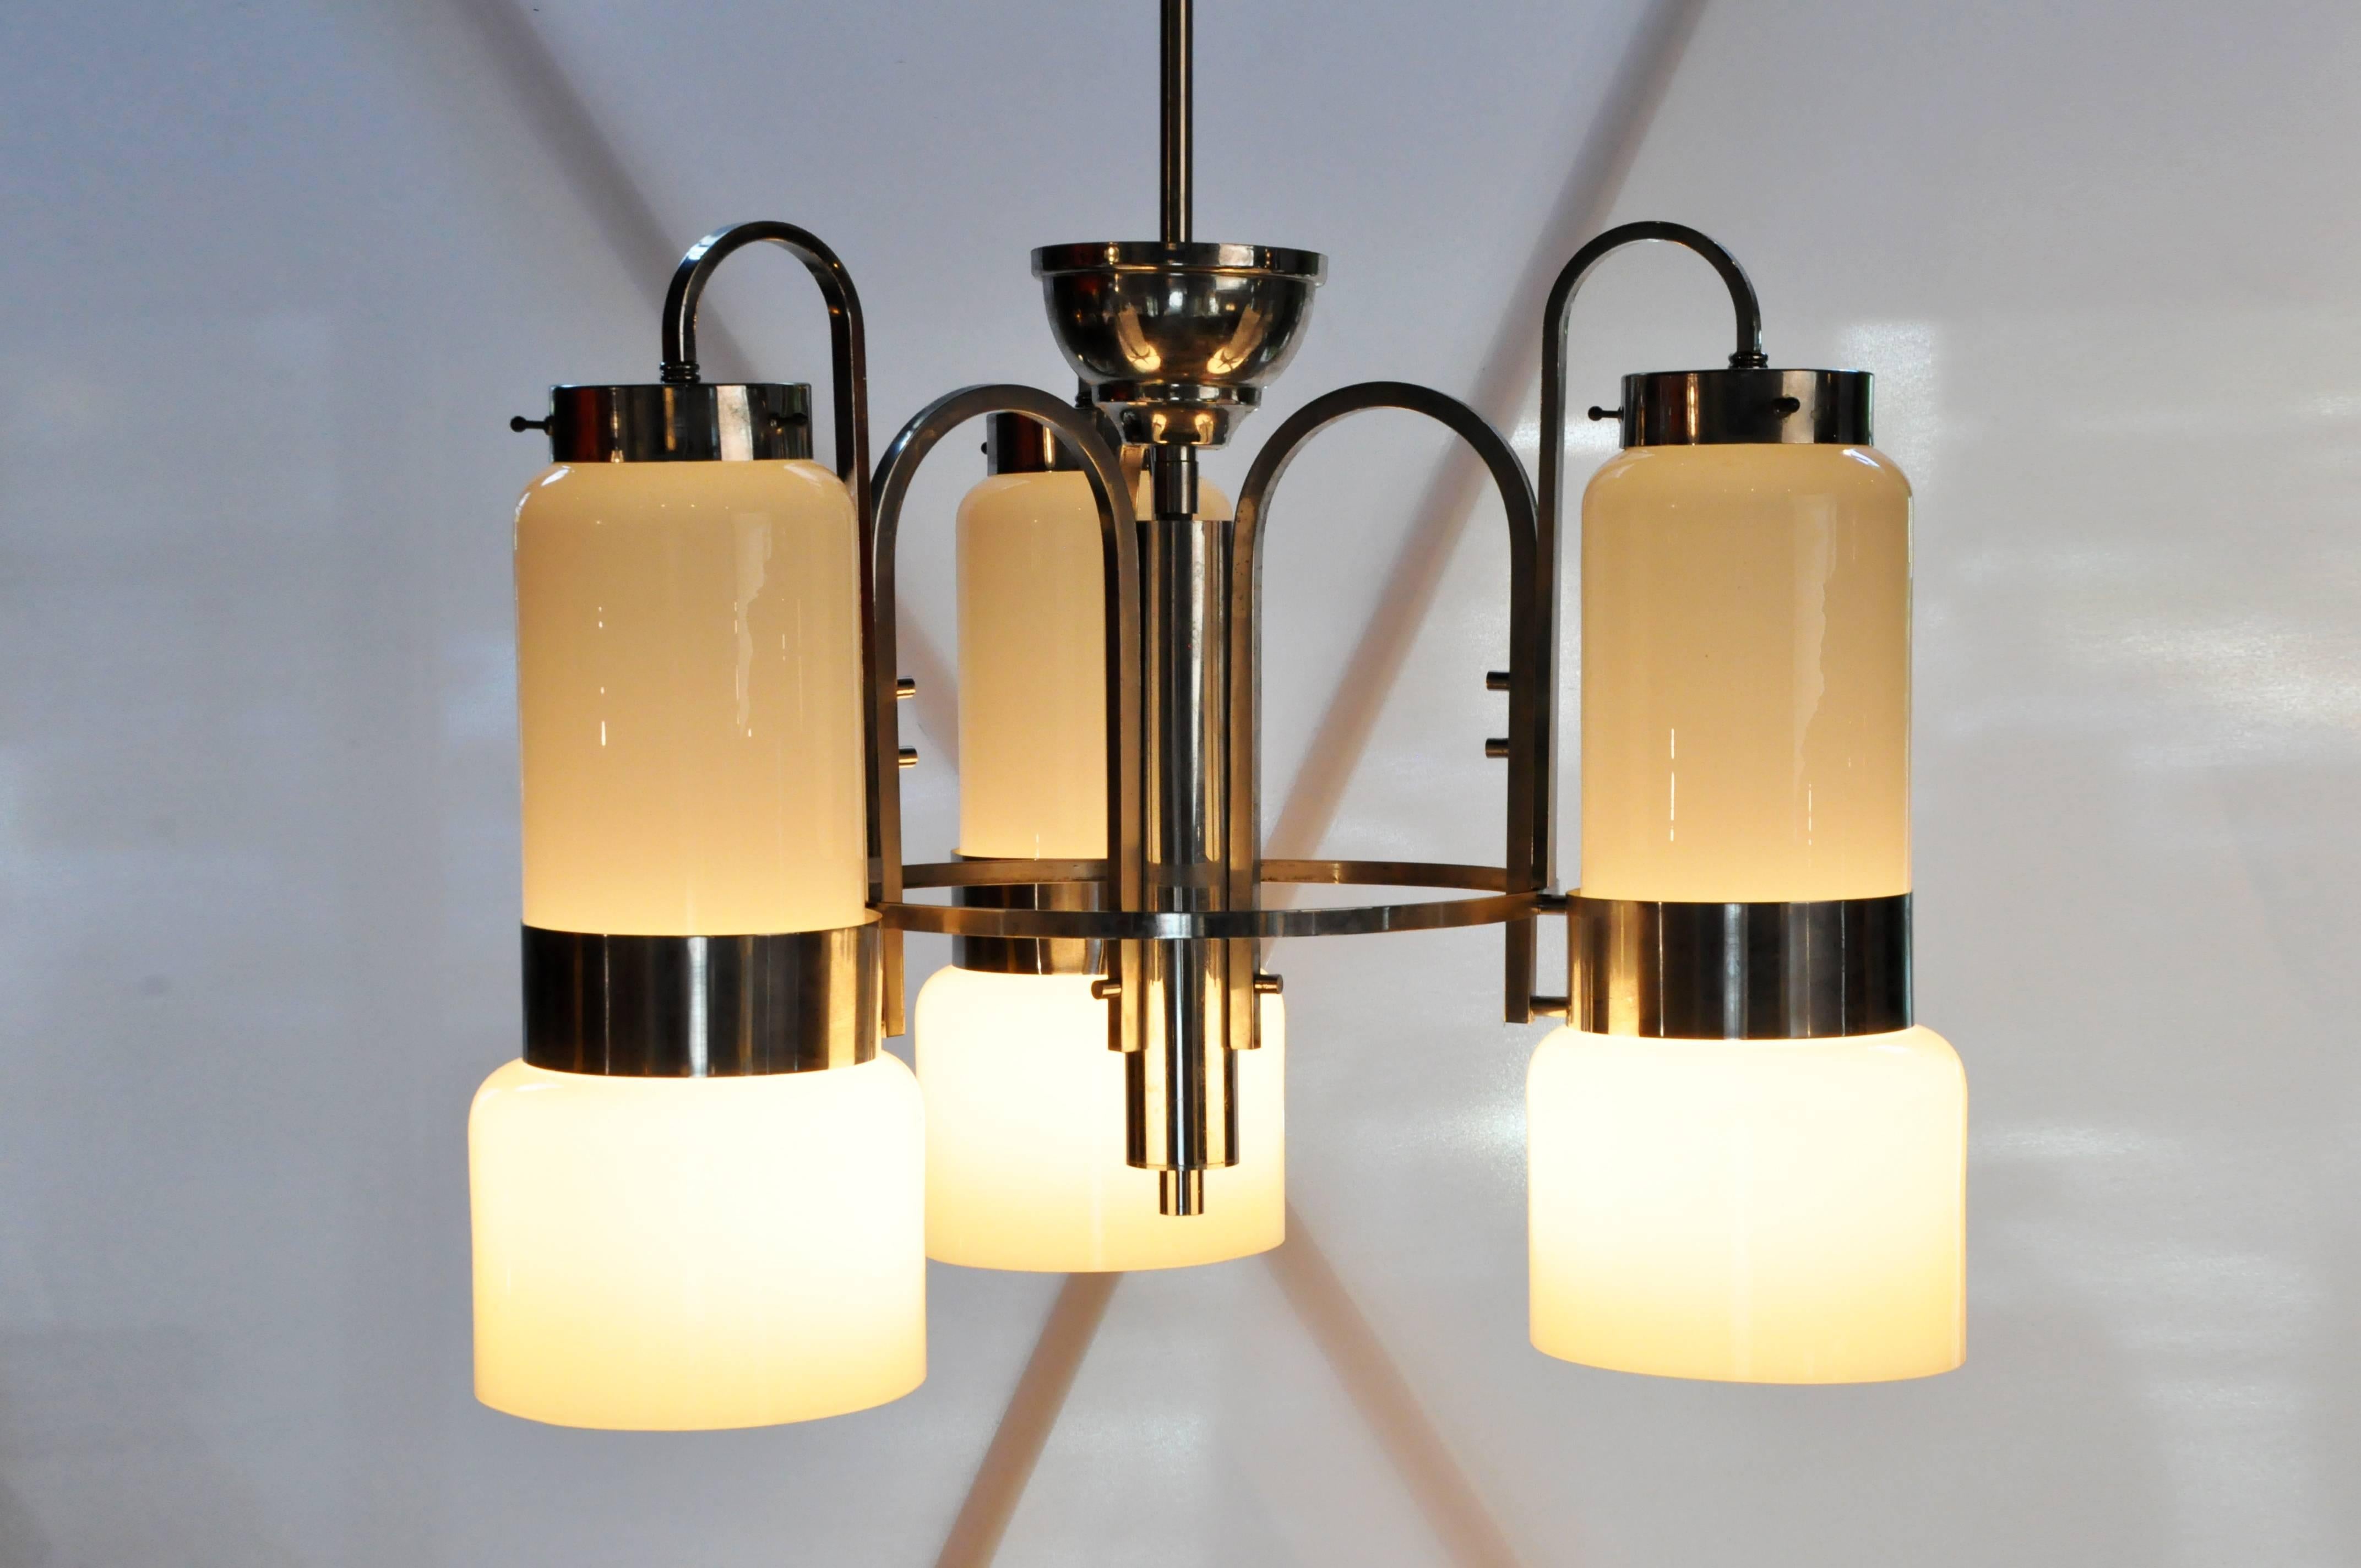 This stylish Mid-Century light piece is composed of a single tier of frosted glass cylinders mounted on a grid of concentric rings and metal arches. Both artistic and eclectic it imparts a fun, vintage vibe.